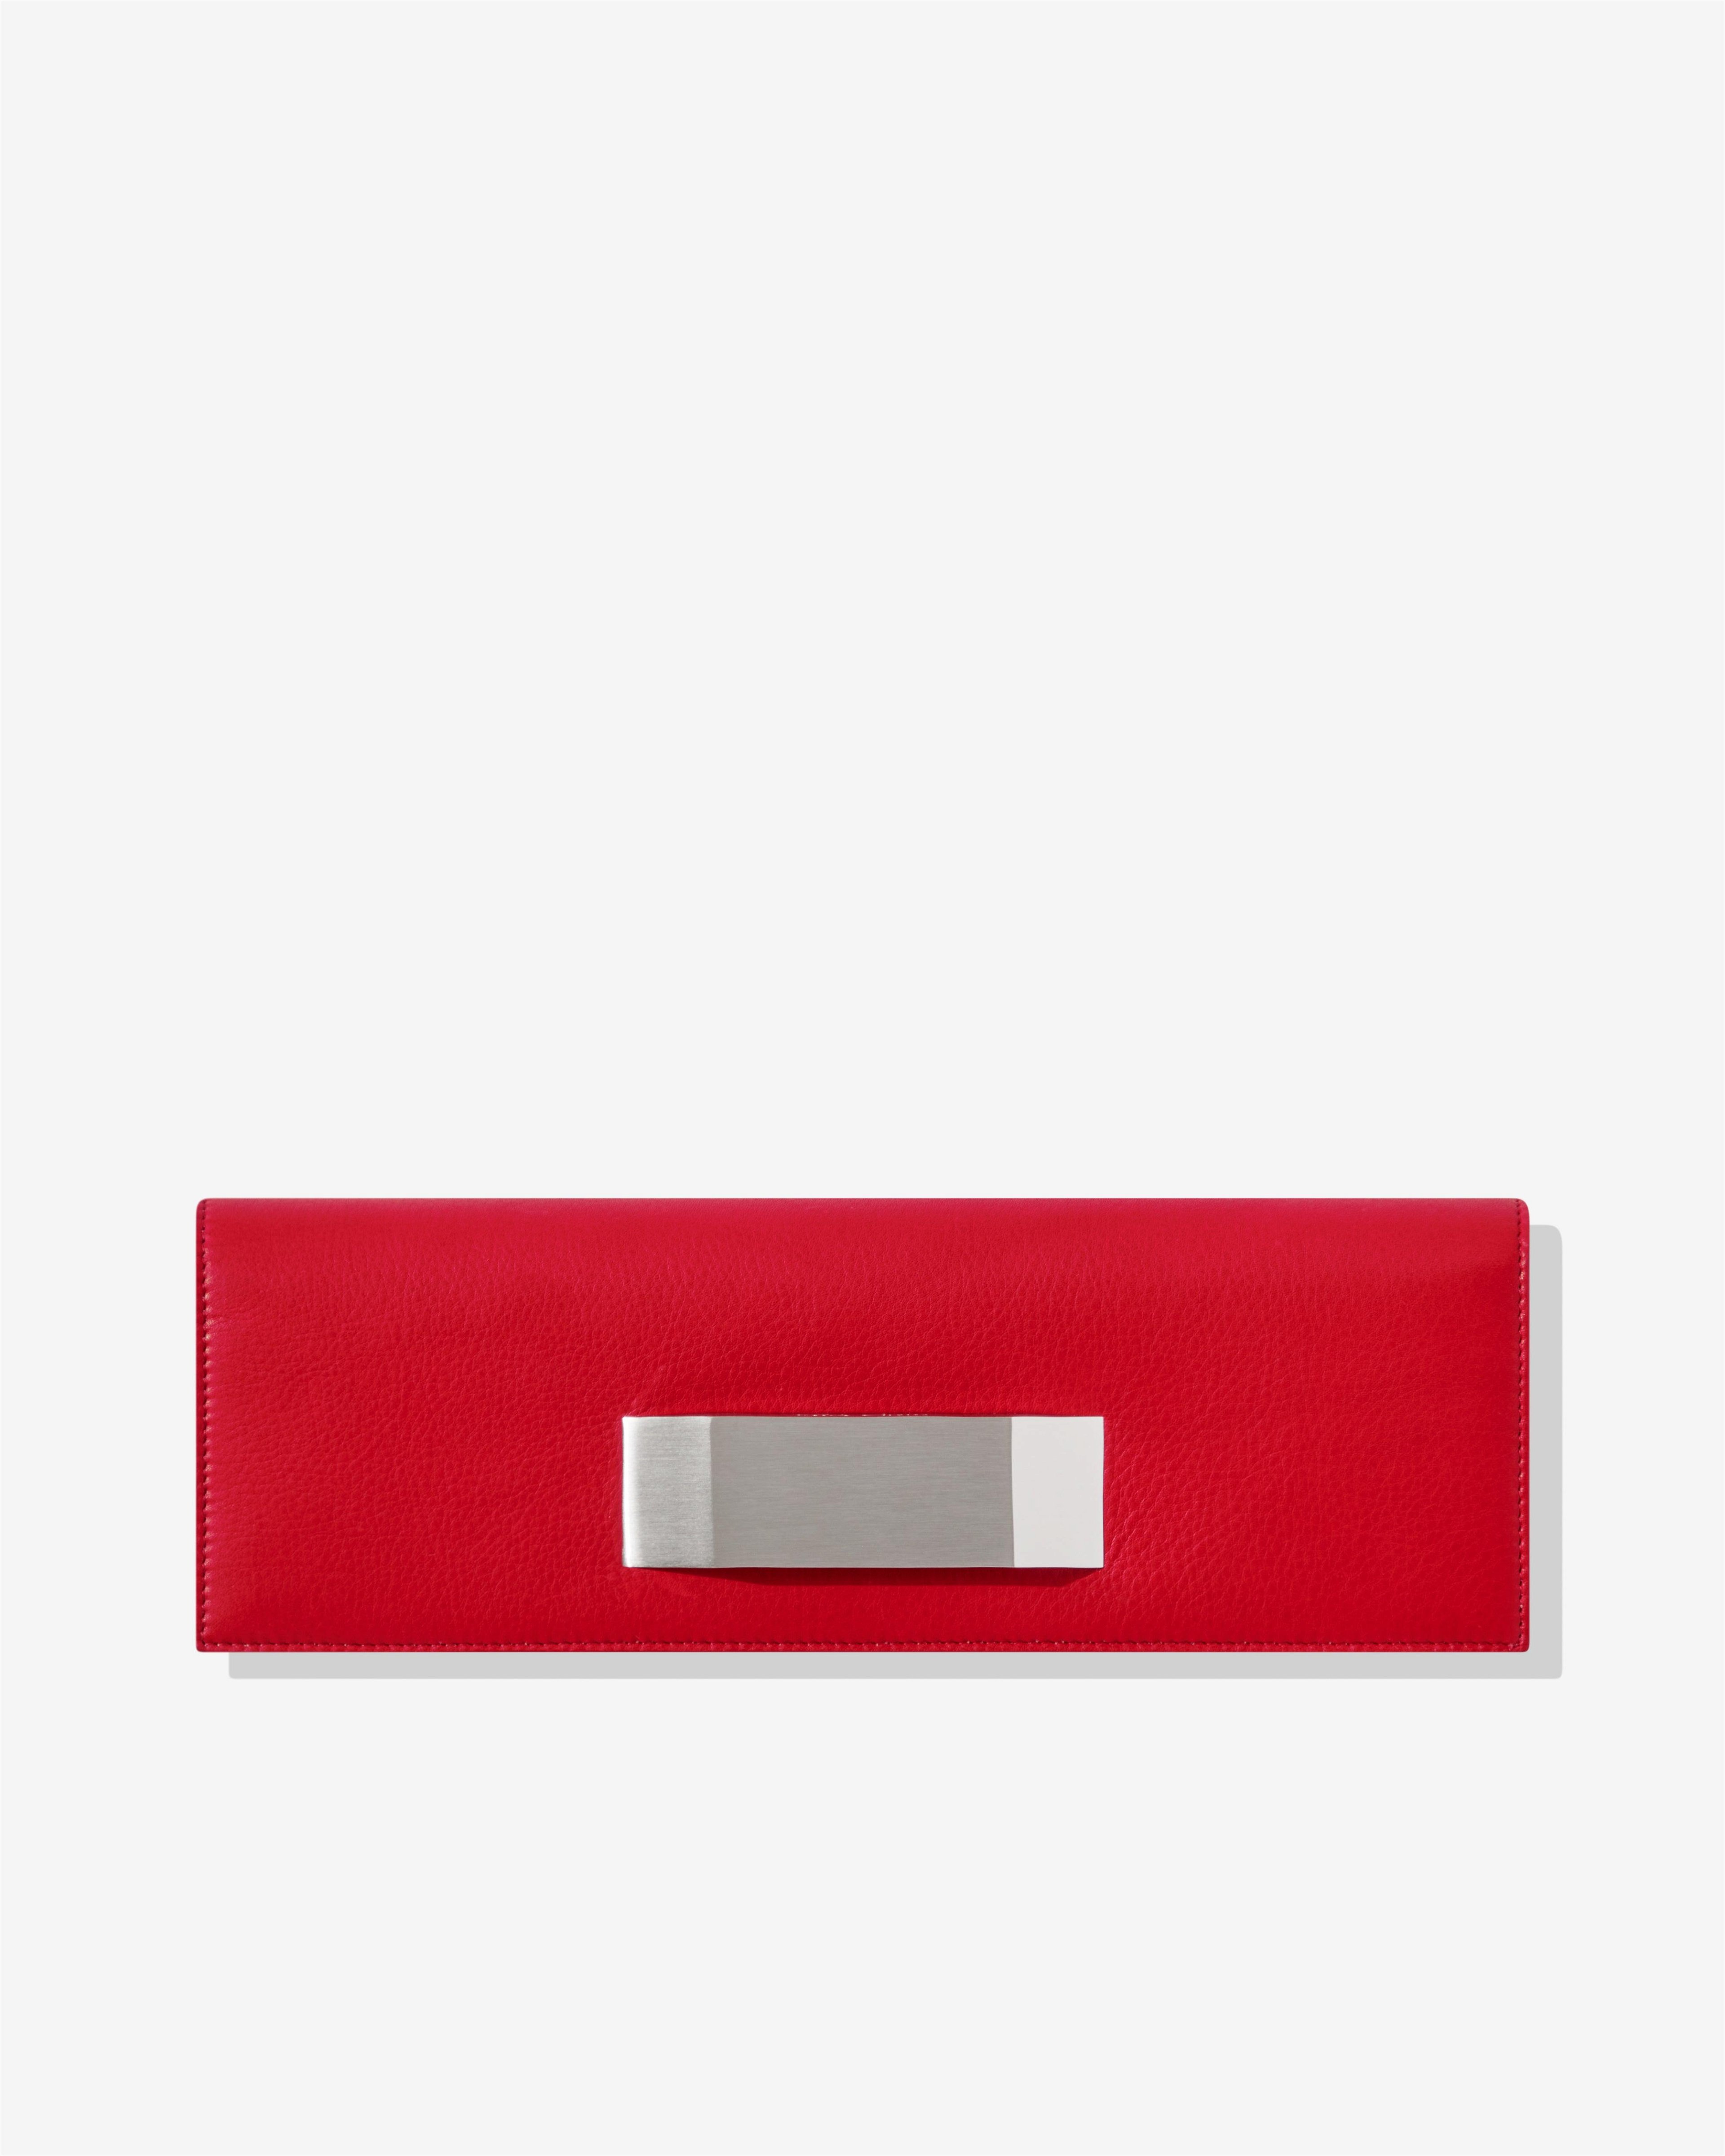 Rick Owens - Men's Leather Baguette Clutch - (Cardinal Red) by RICK OWENS